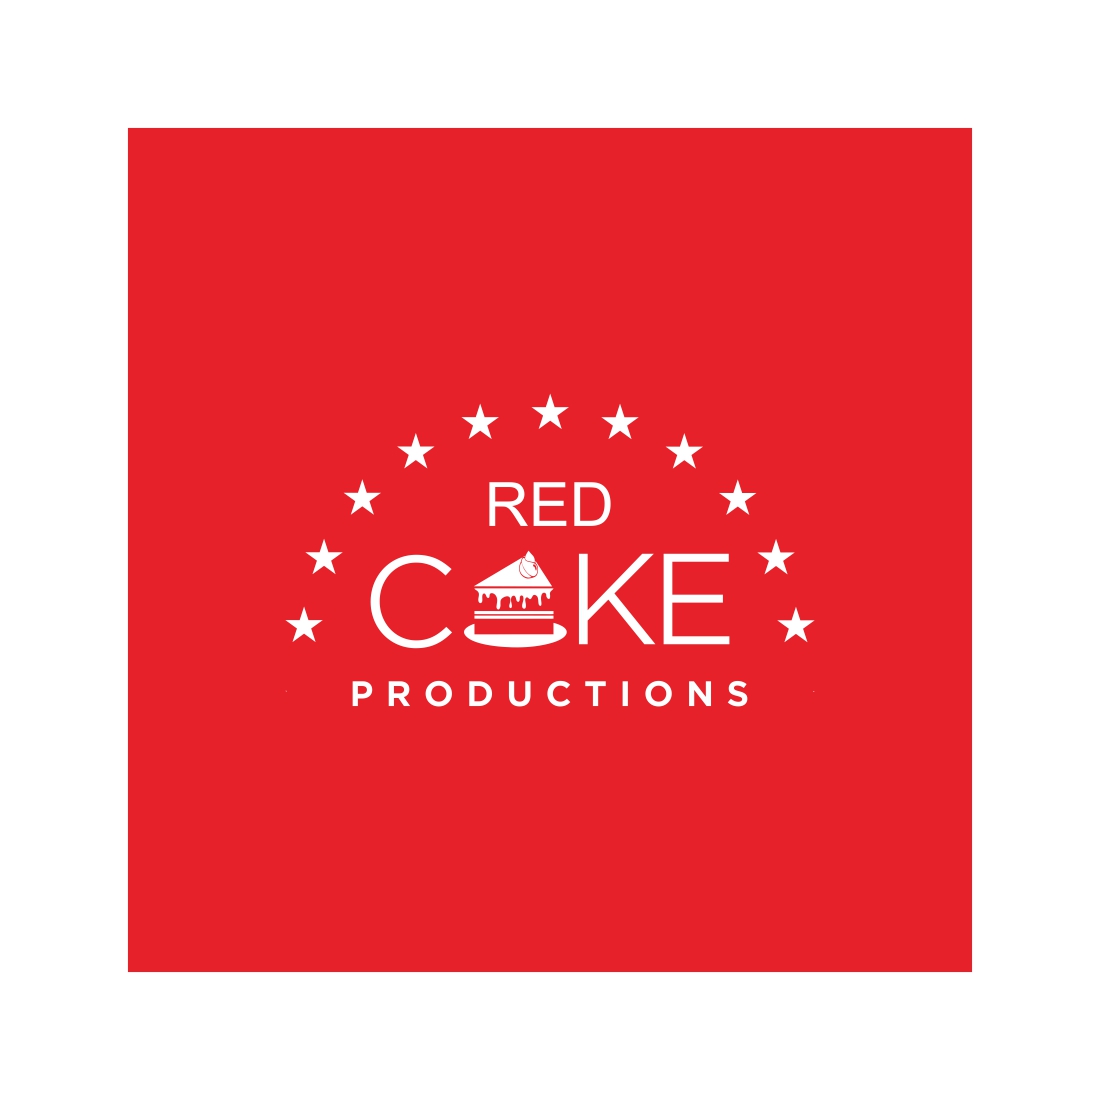 Silhouette cake template logo design vector with red nuances cover image.